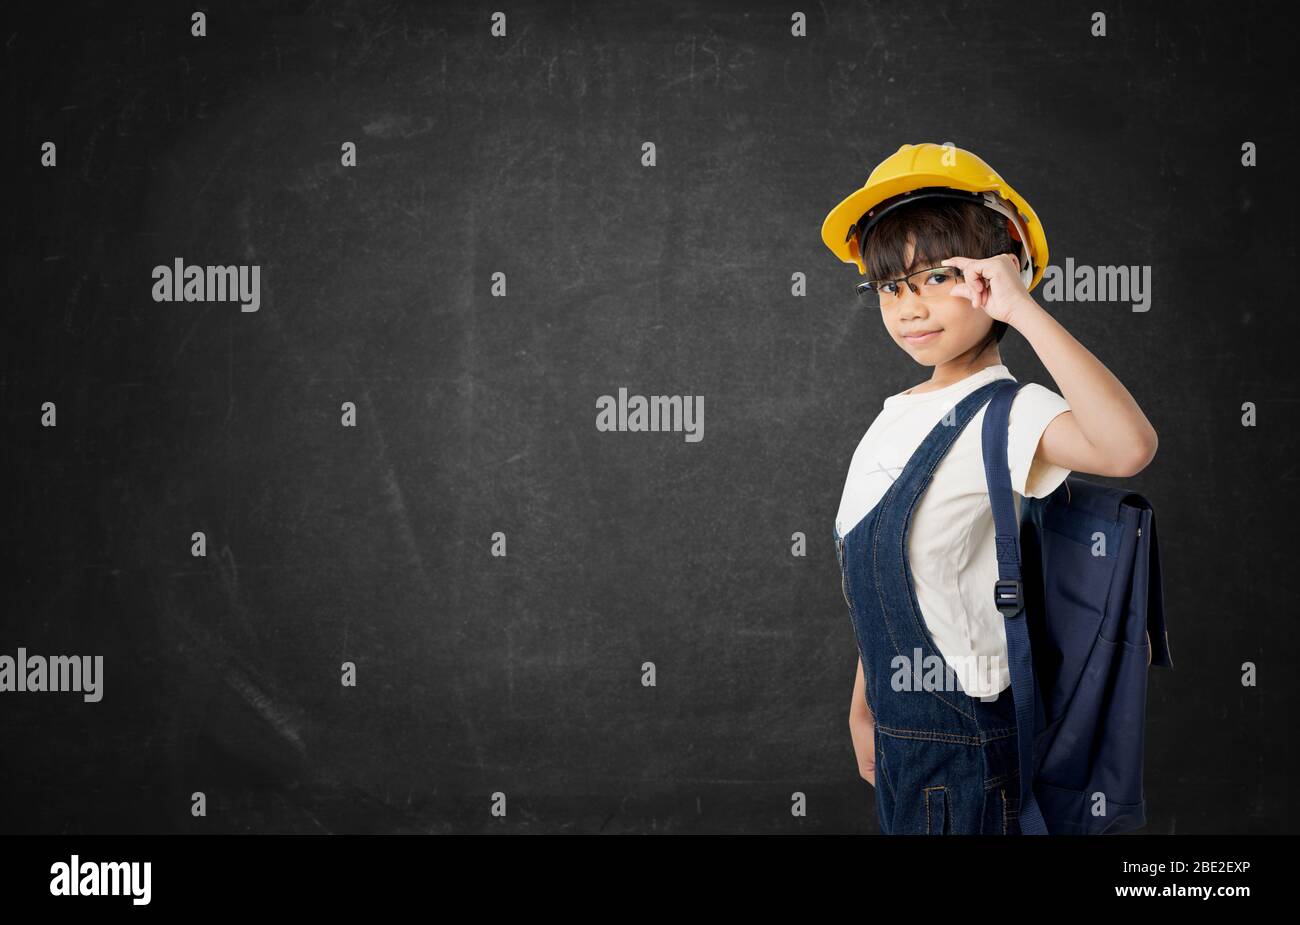 Asian girl Thai student want to be engineer, engineering kid isolated on dark chalkboard background Stock Photo